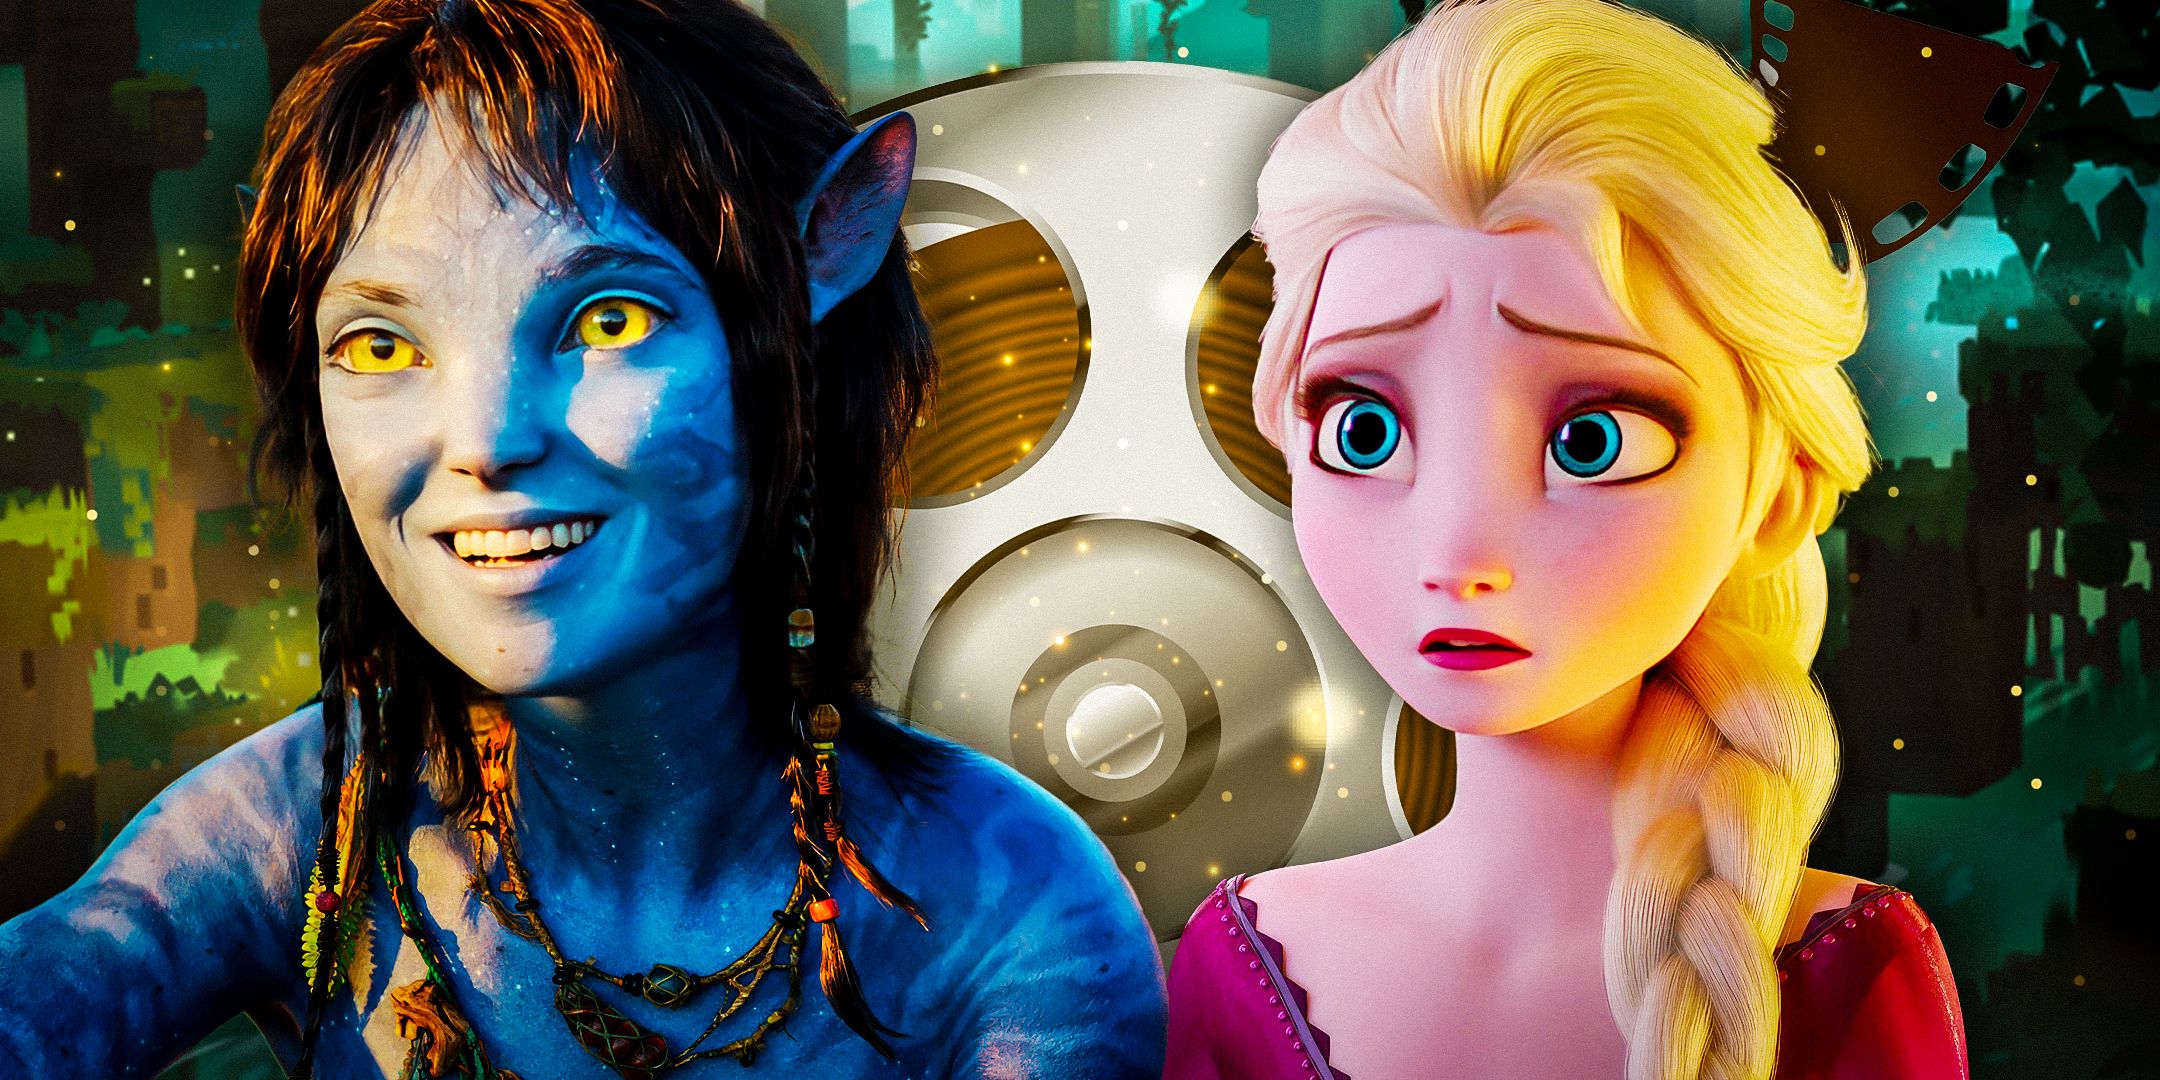 (Sigourney-Weaver-as-Kiri)-from-Avatar--The-Way-of-Water-and-Elsa-from-Frozen-II